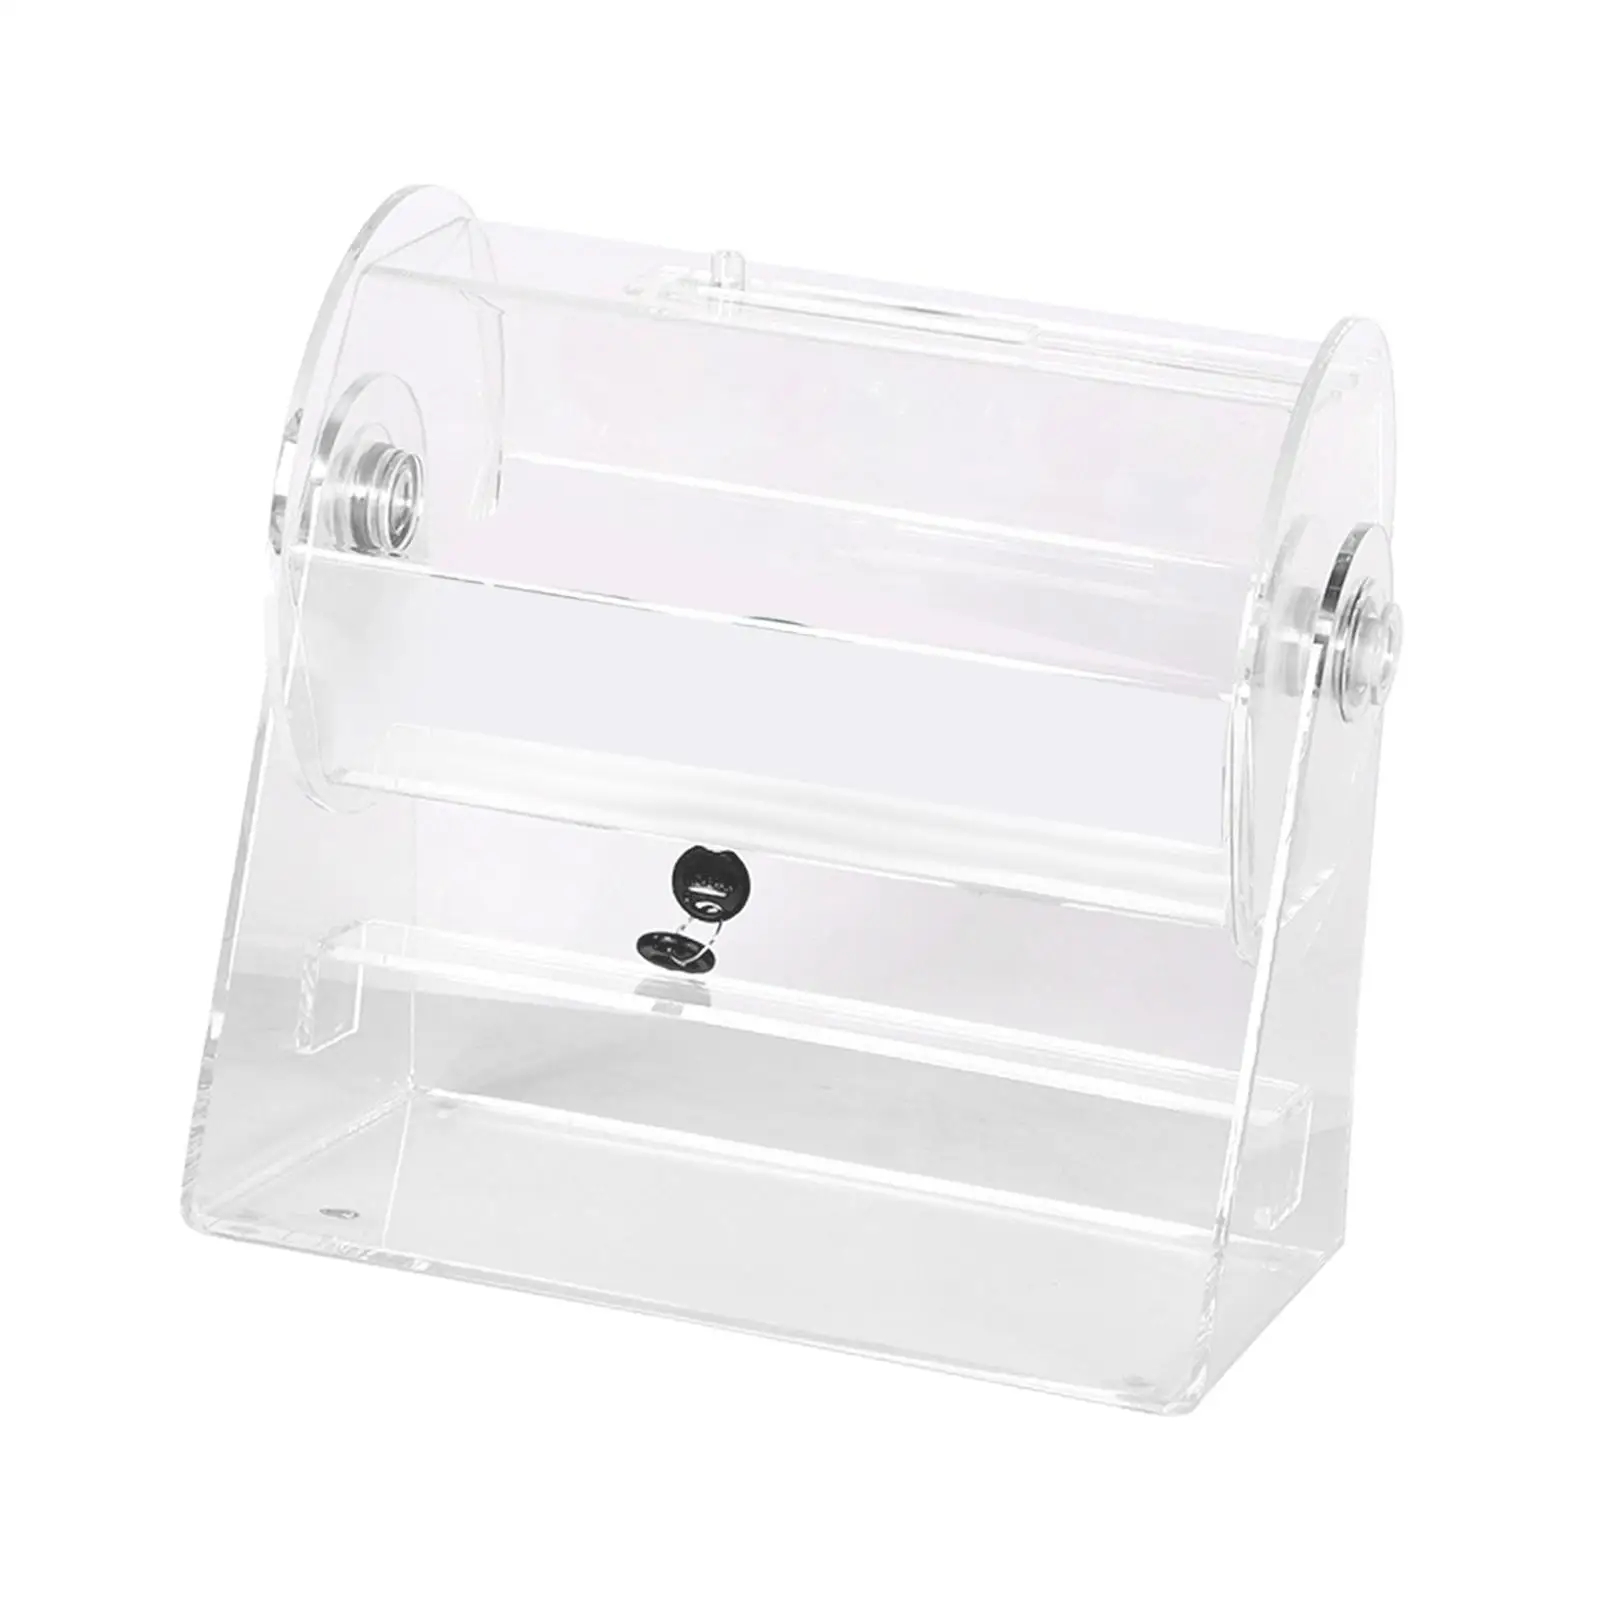 Automatic Lottery Cage Lottery Parent Child Games Raffle Case Acrylic Raffle Drum for Holiday Birthday Party Activity Travel